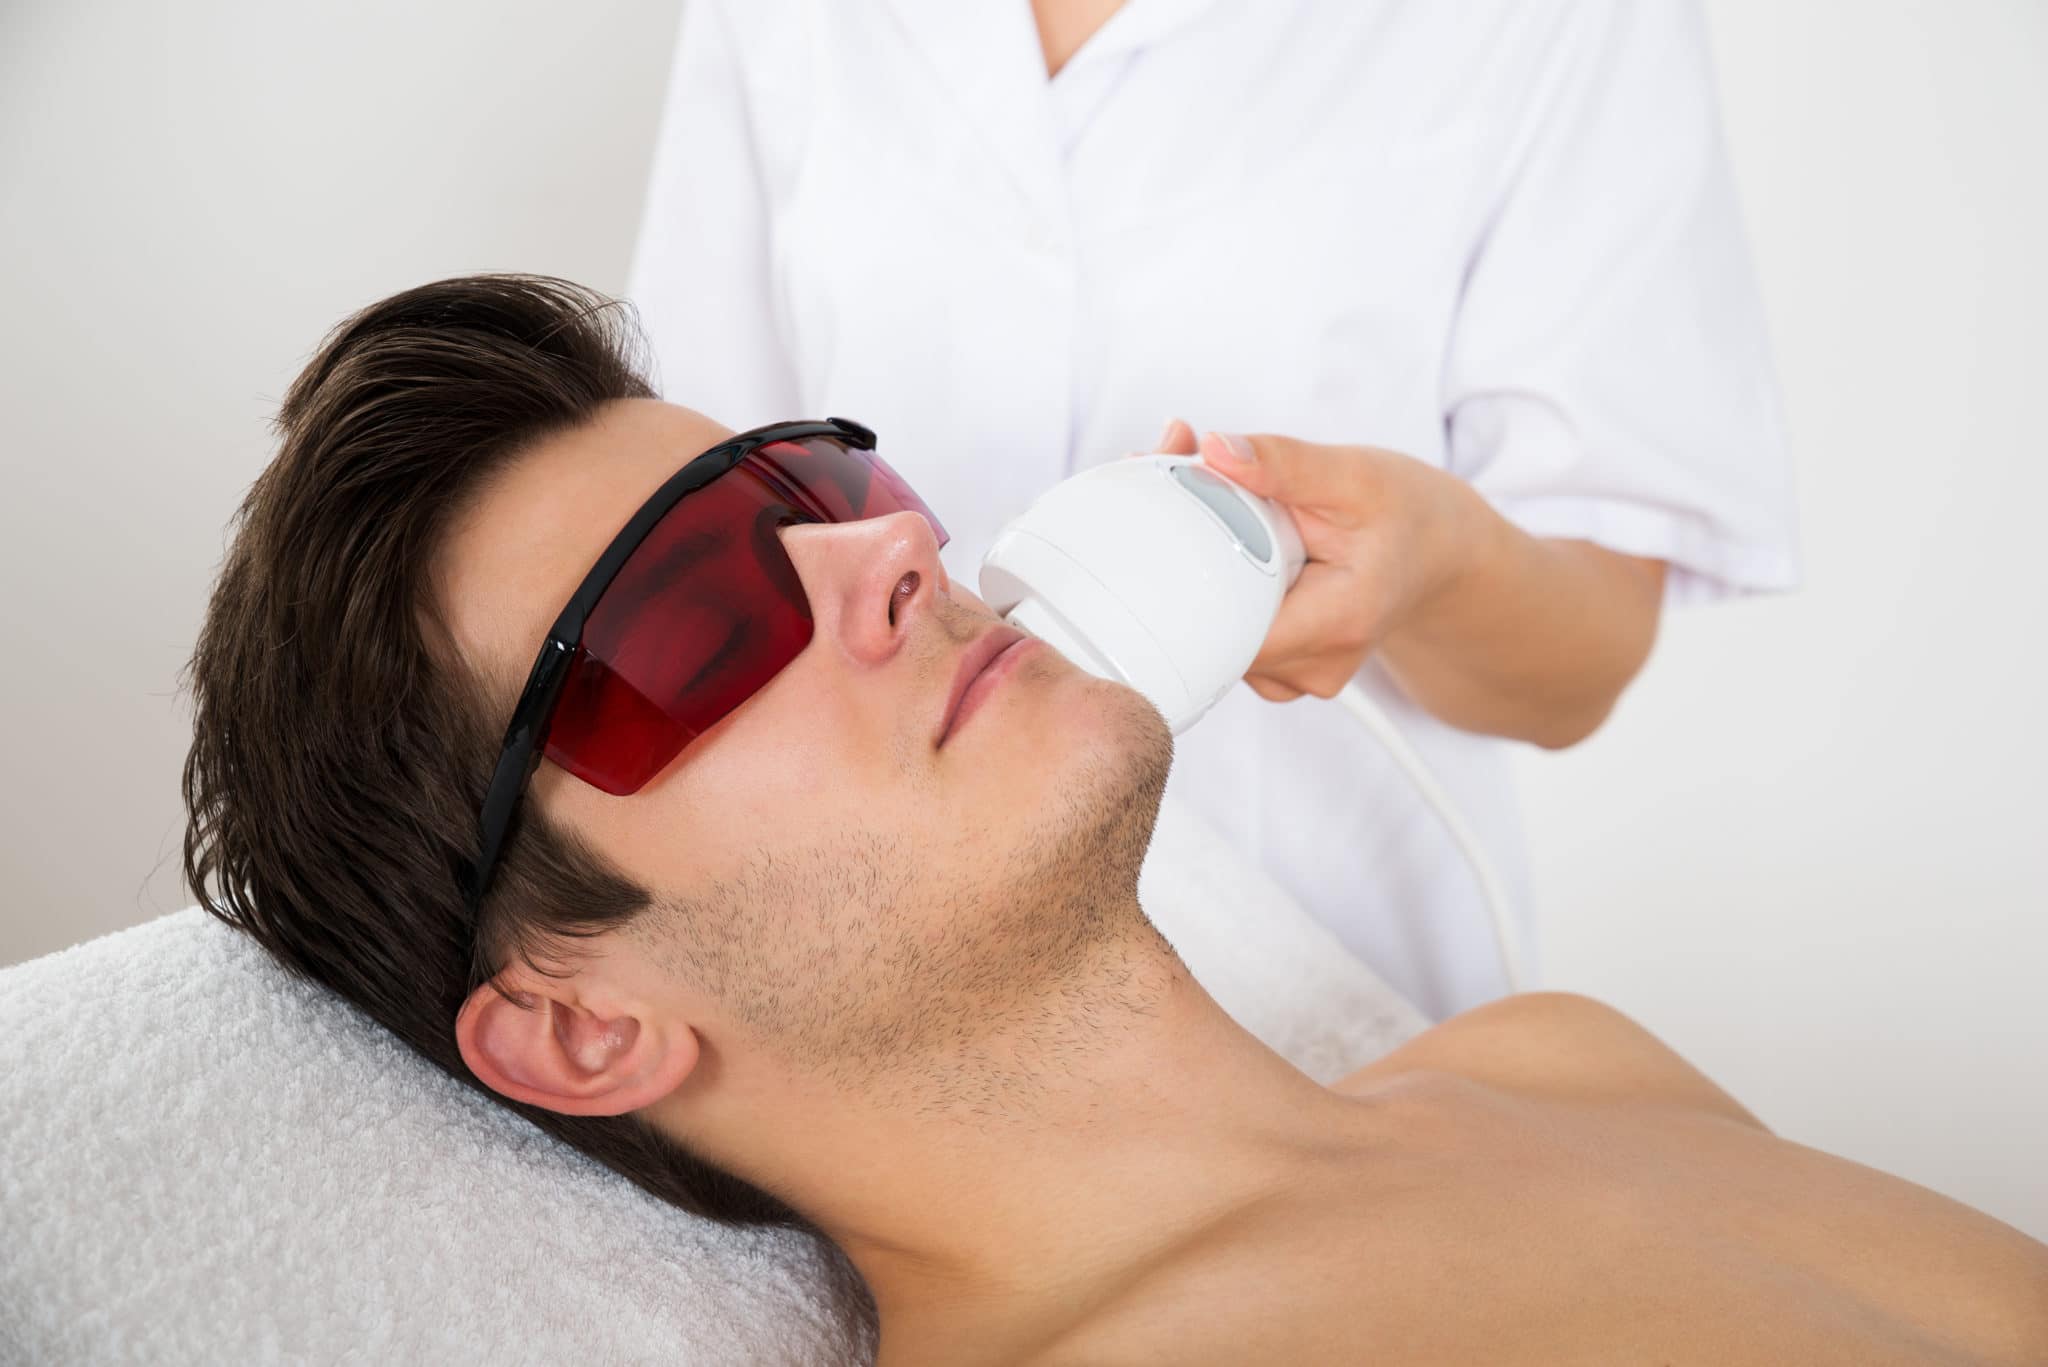 laser hair removal for men before and after